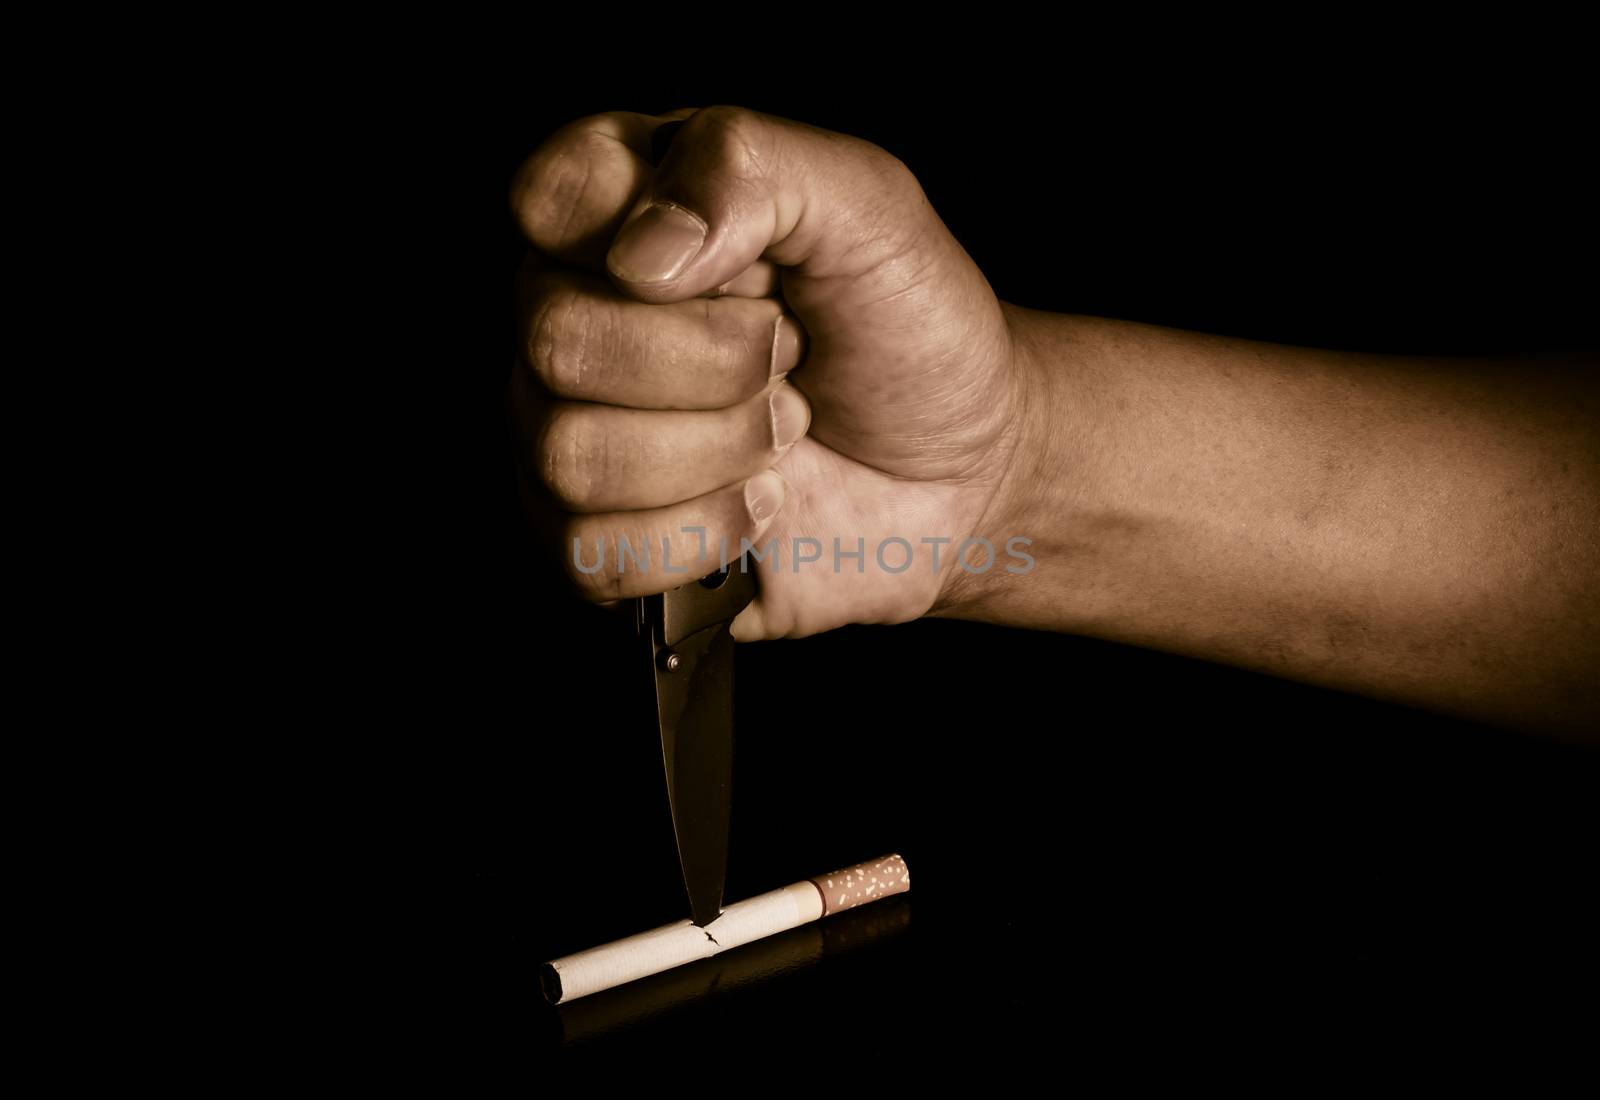 Handle knife stabbed into cigarettes concept eliminate smoking, quit smoking.